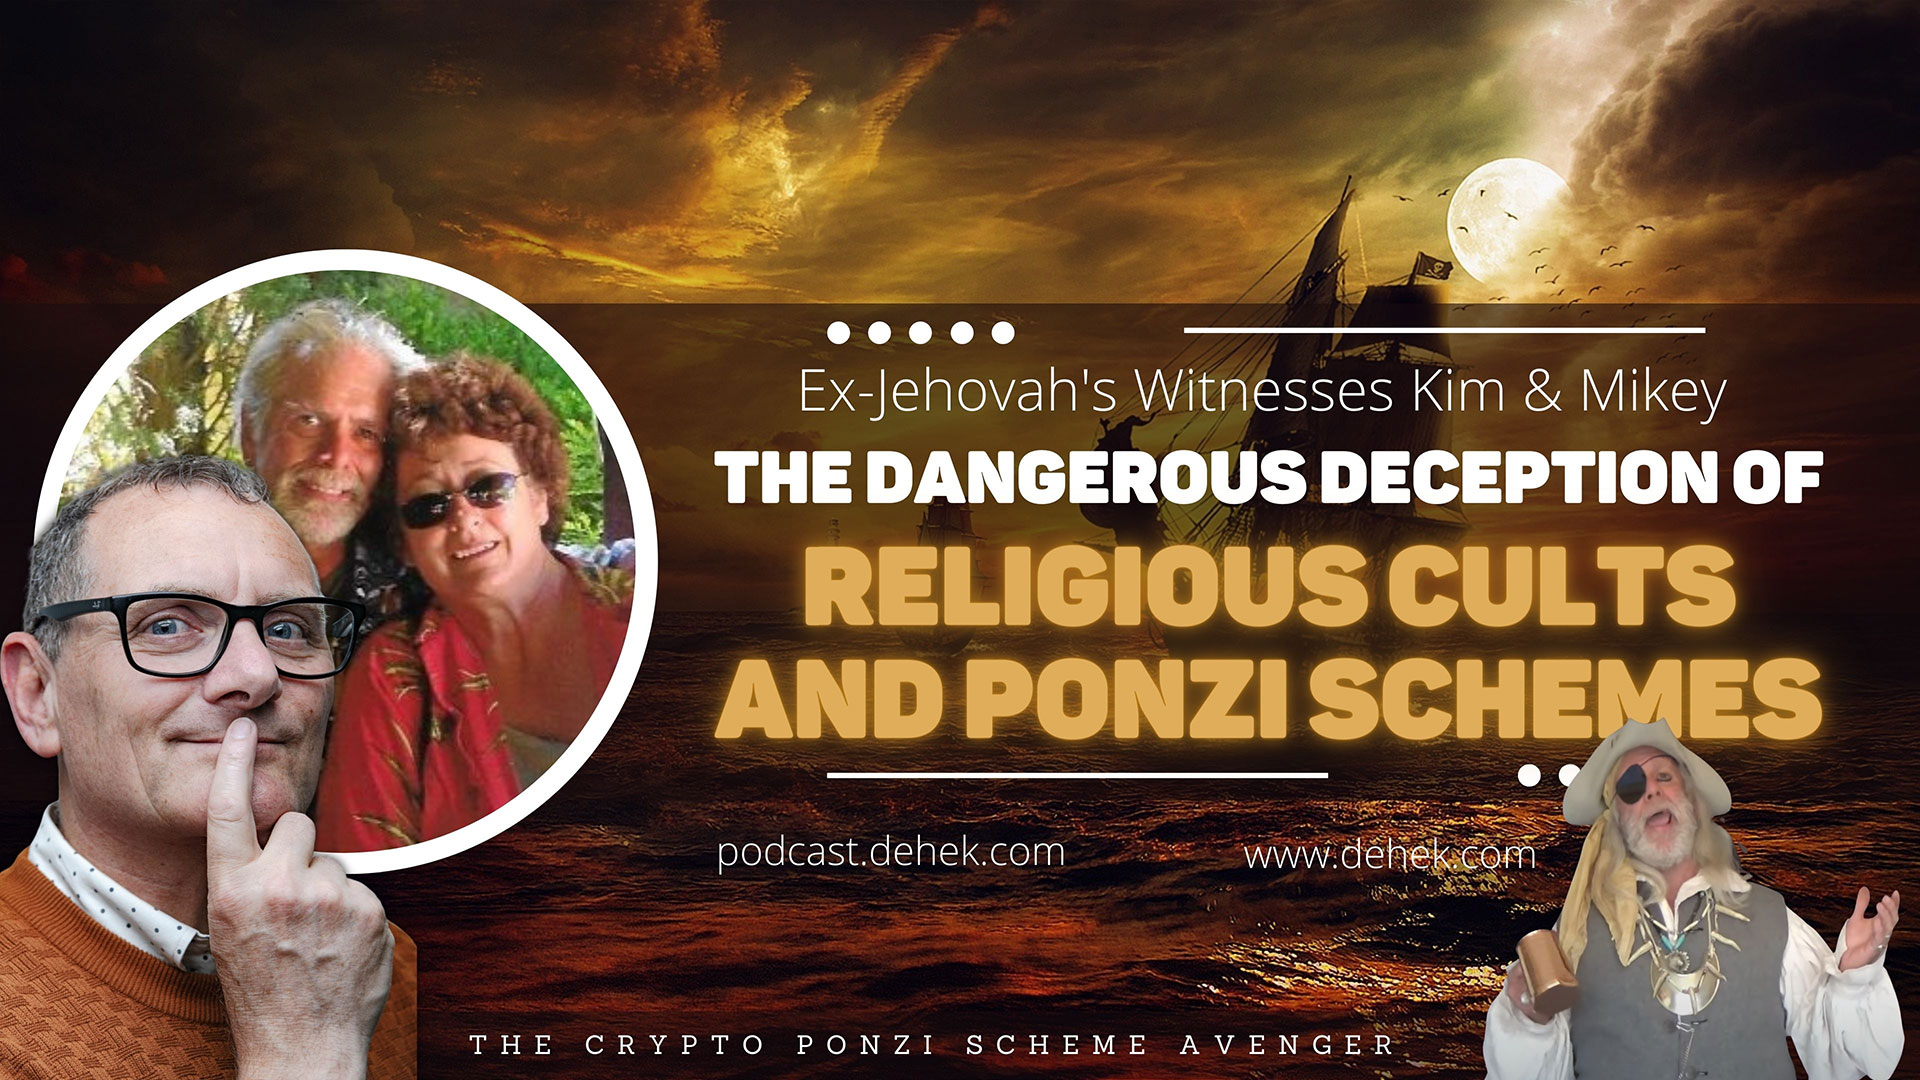 The Dangerous Deception of Religious Cults and Ponzi Schemes